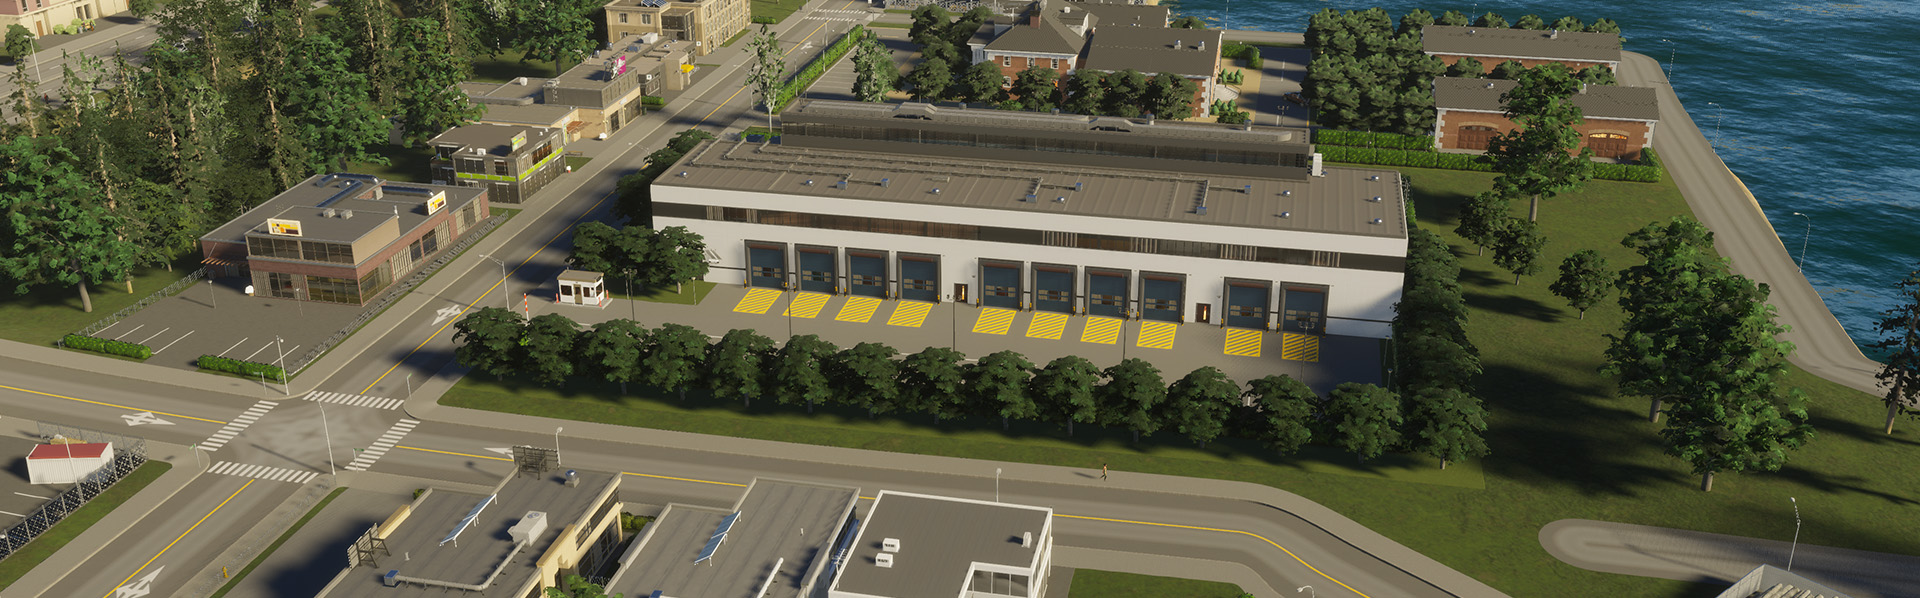 Cities: Skylines 2 - How To Deal With Abandoned Buildings